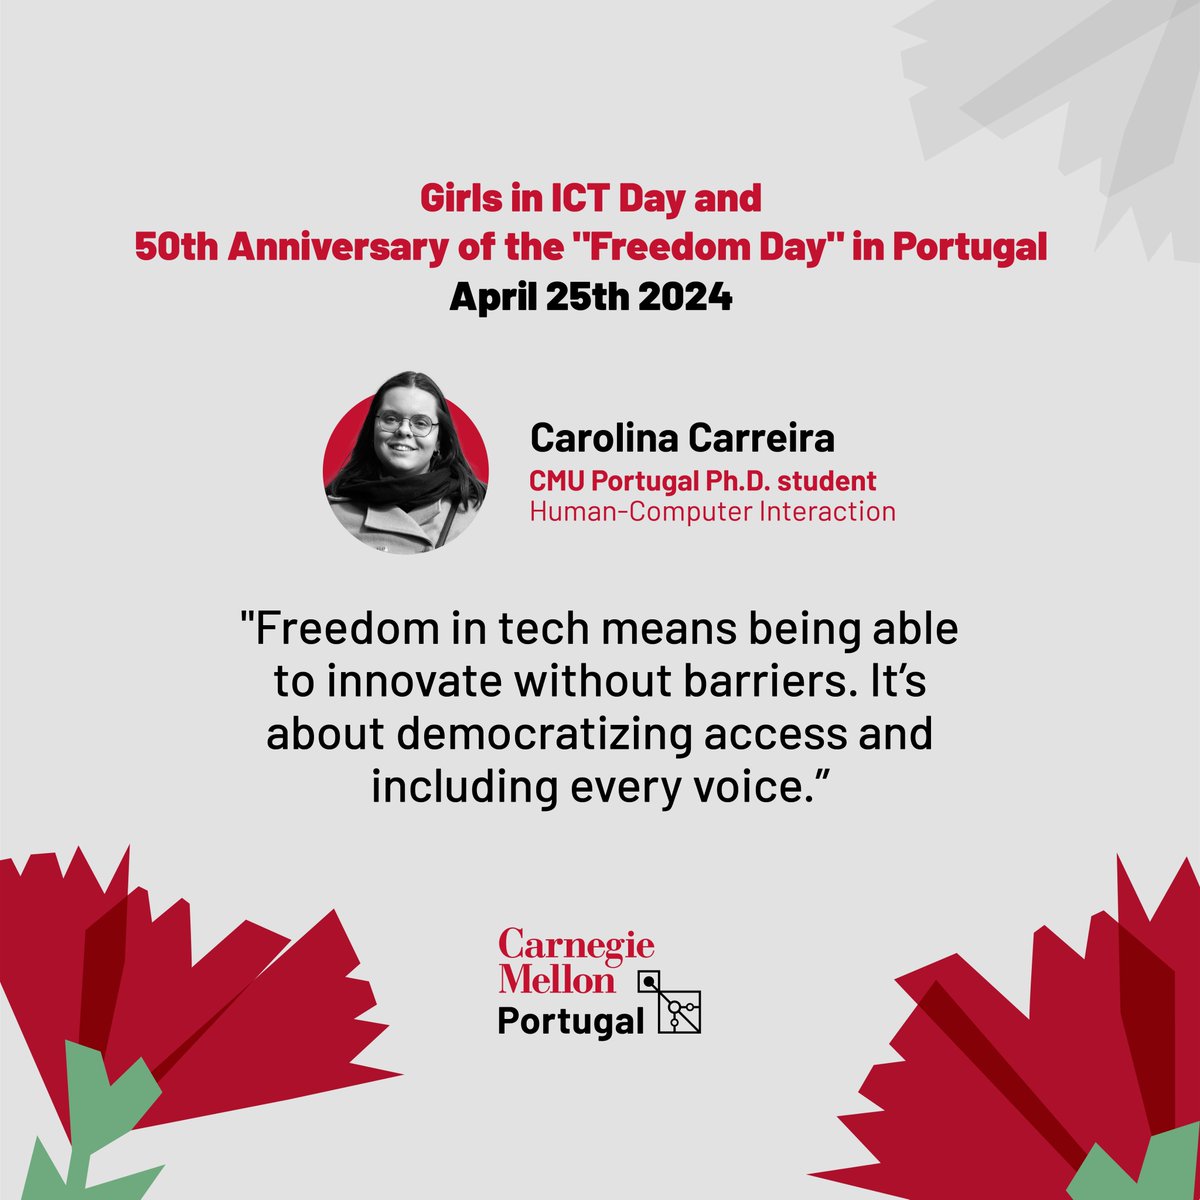 April 25th 2024 I Join us as we celebrate the #GirlsInICTDay and simultaneously the 50th Anniversary of the Portuguese Revolution and the end of the 🇵🇹dictatorship. To celebrate both, here's what #CMUPortugal girls have to say about #Freedom!👩‍🔬✊ #25deabril #GirlsInICT @cmuhcii